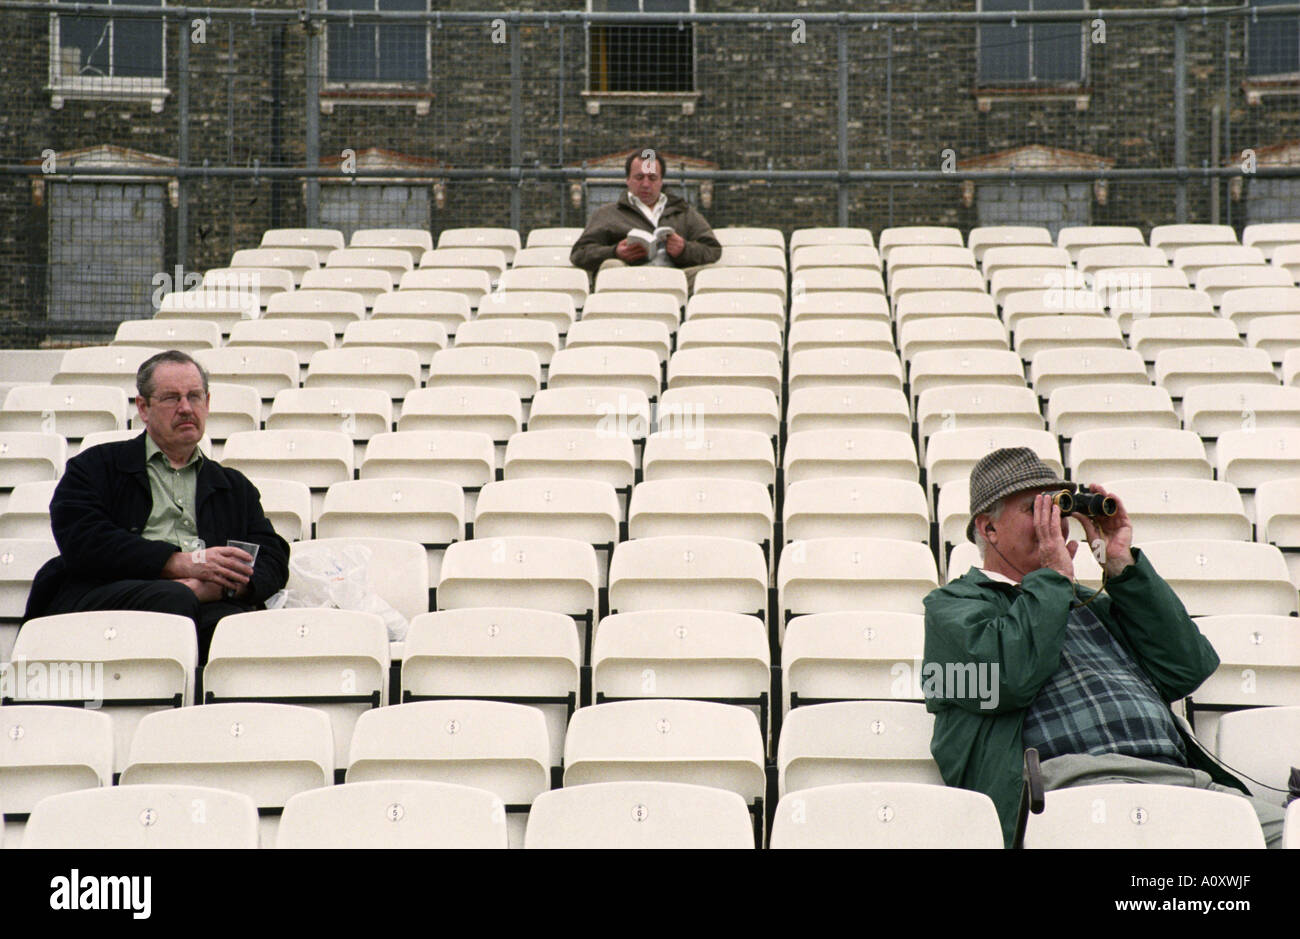 UK ENGLAND LONDON Spectators at a County Cricket match held at The Oval Stock Photo